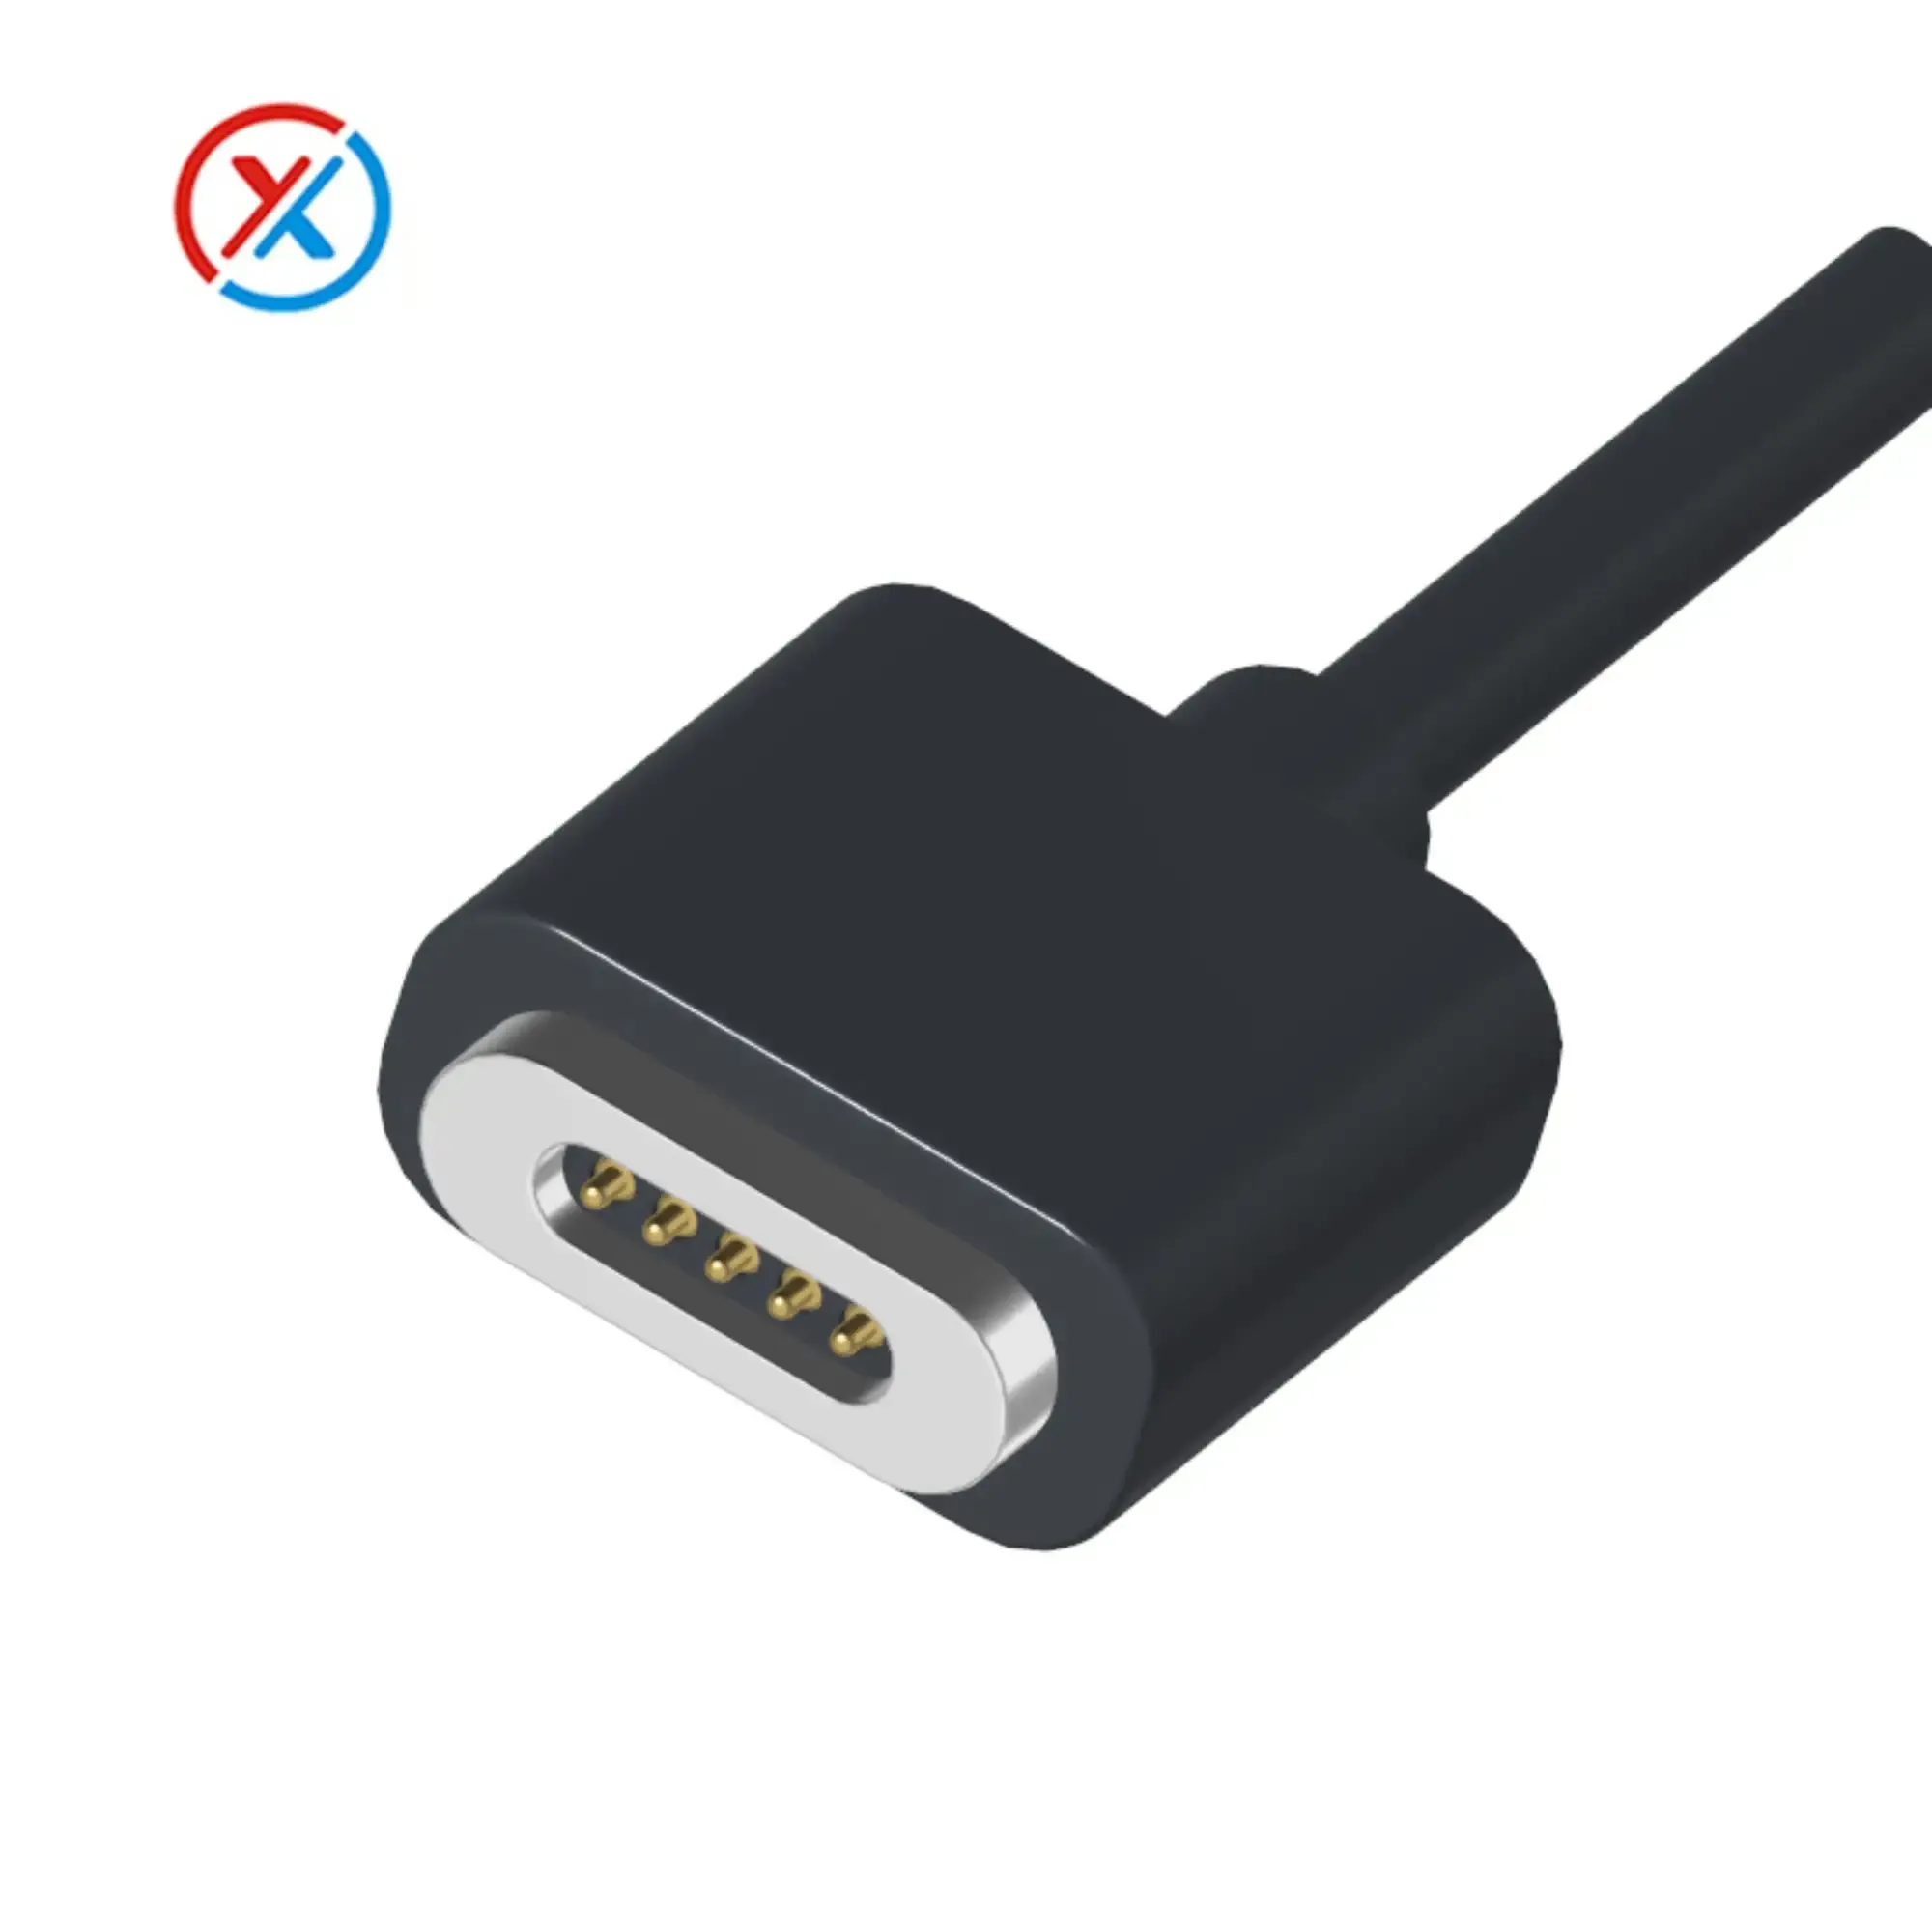 Magnetic Data Cable: The Future of Connectivity